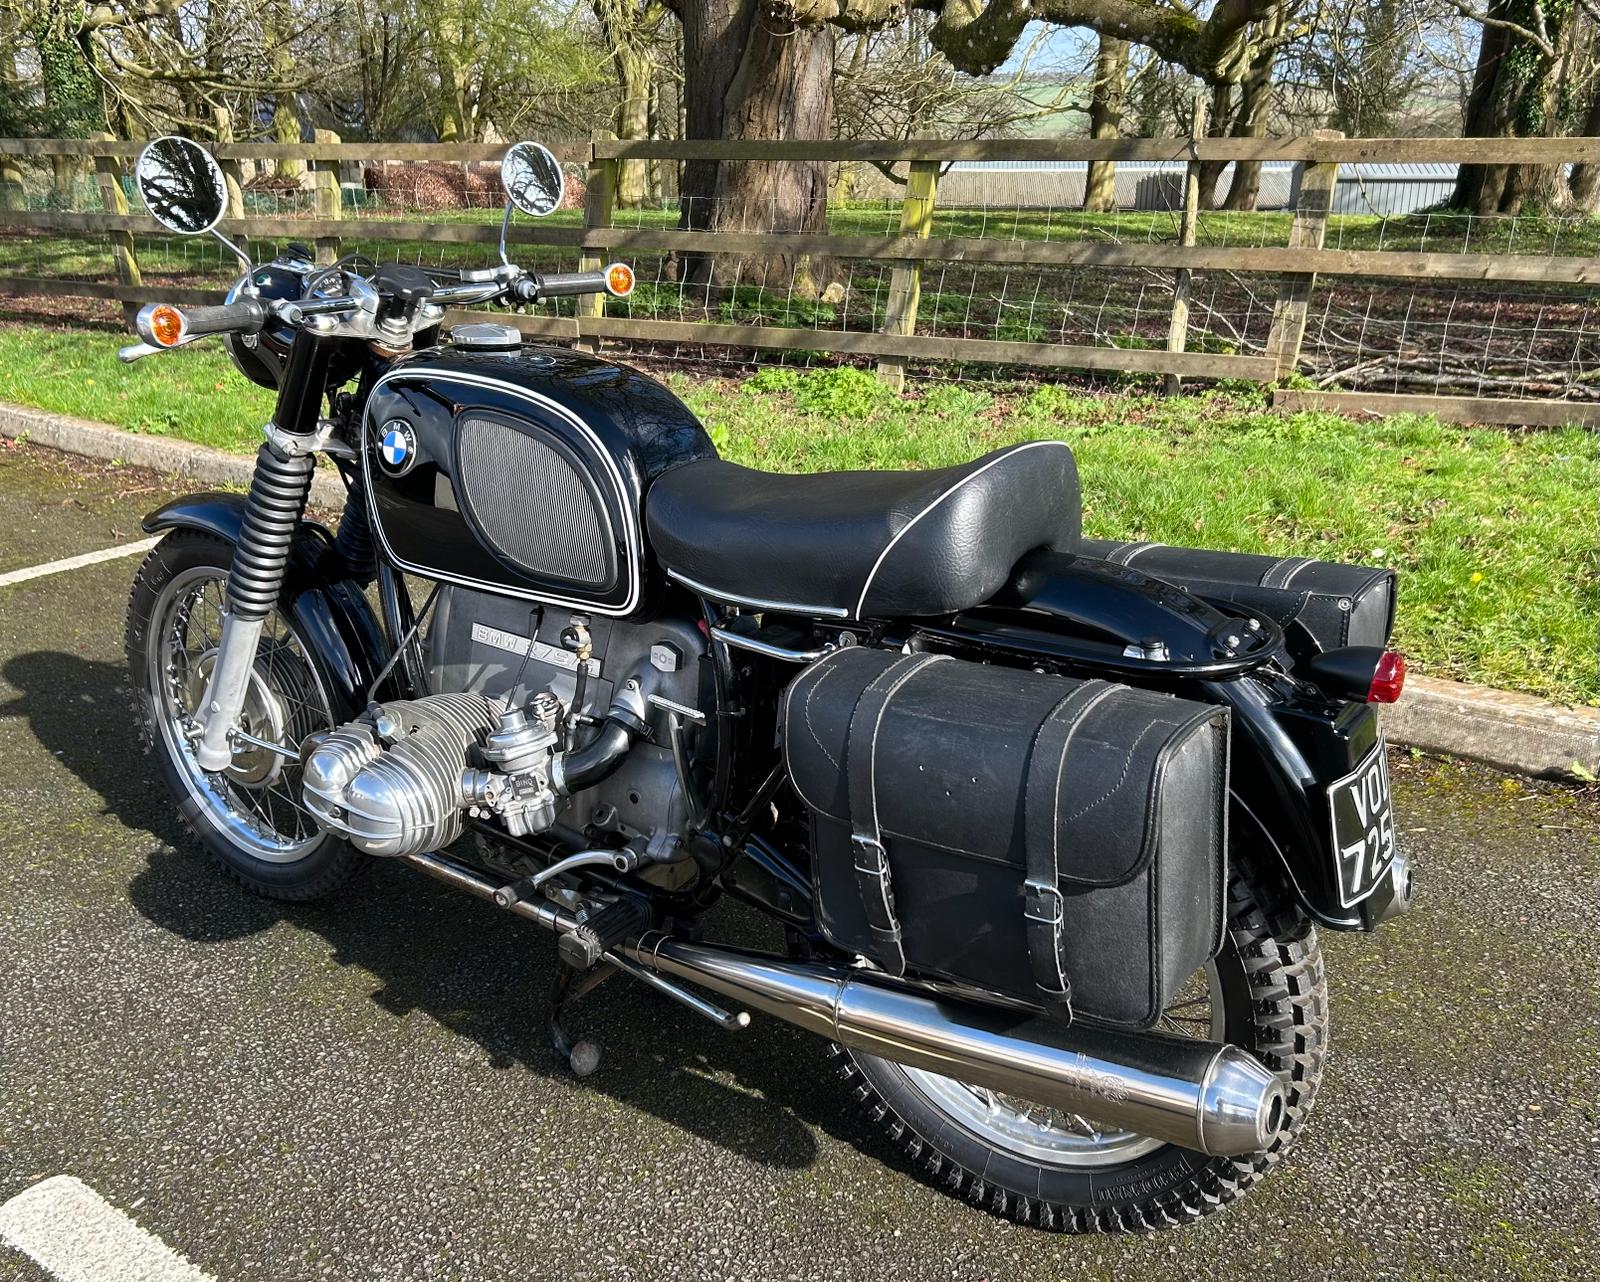 A BMW R75/5 MOTORCYCLE .1971. 72452 MILES. EXCELLENT WELL RESTORED CONDITION, V5, MOT AND TAX - Image 3 of 17